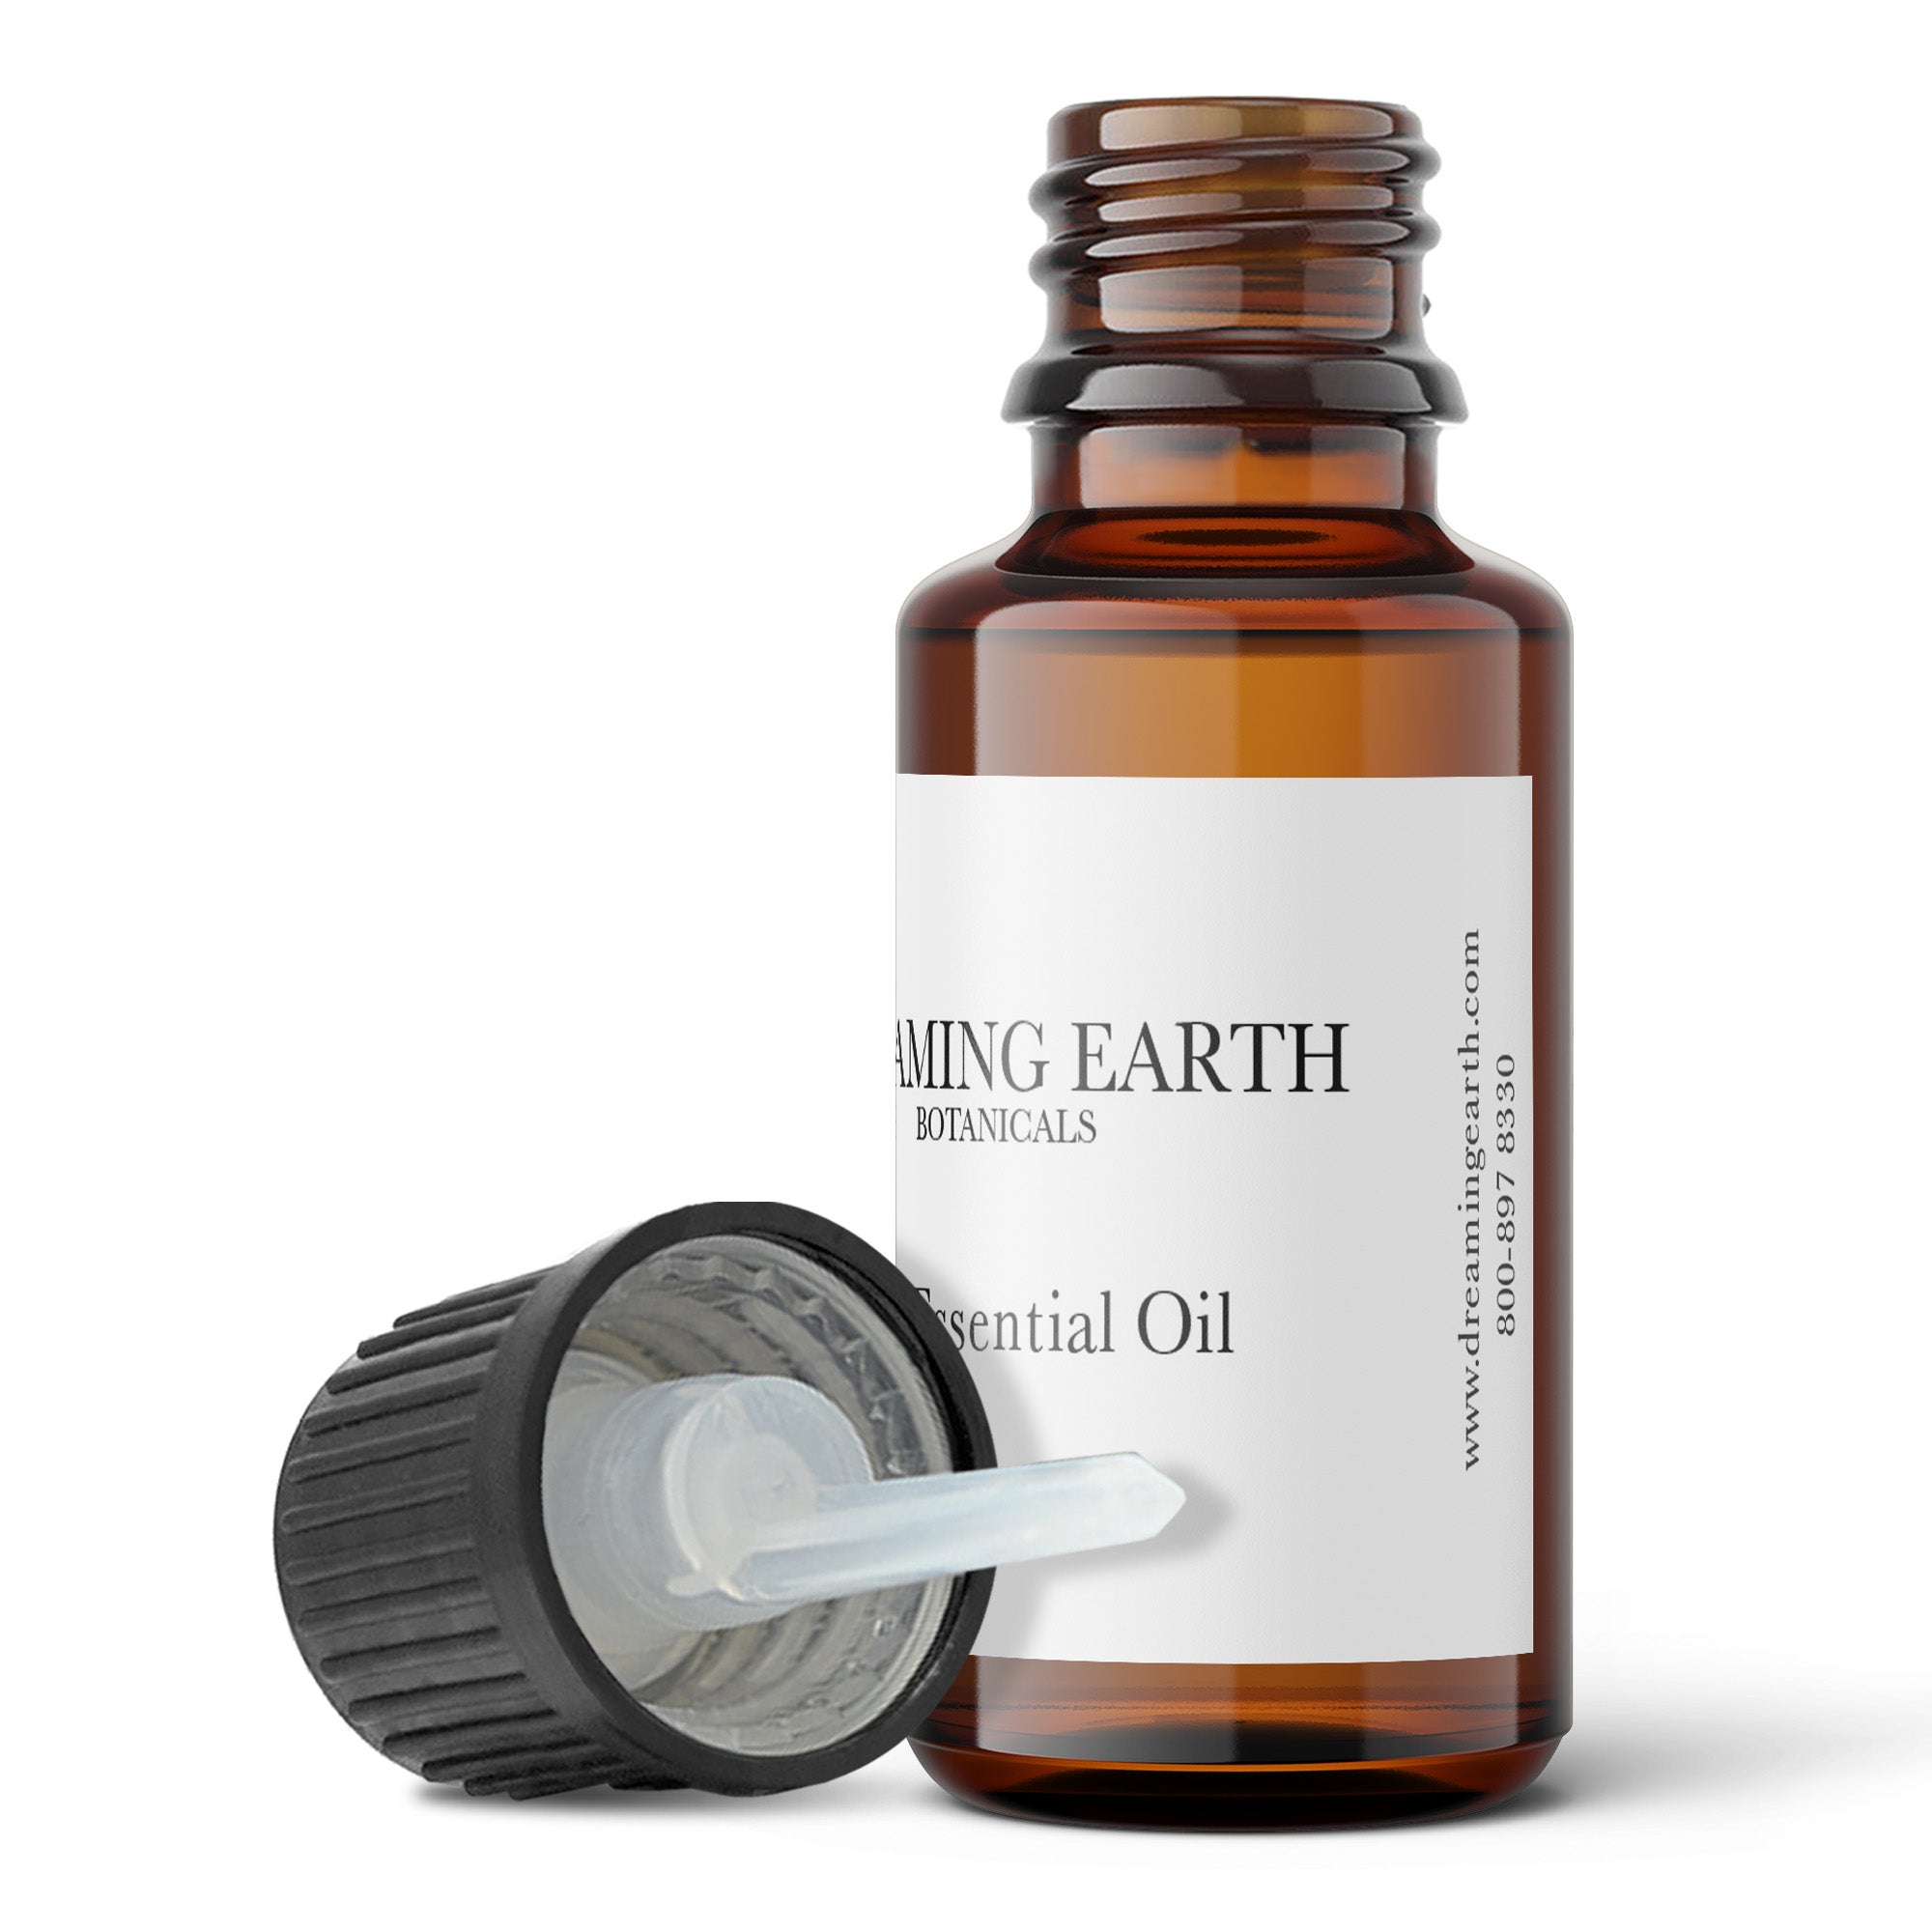 Load image into Gallery viewer, Oregano Organic Essential Oil - Dreaming Earth Inc
